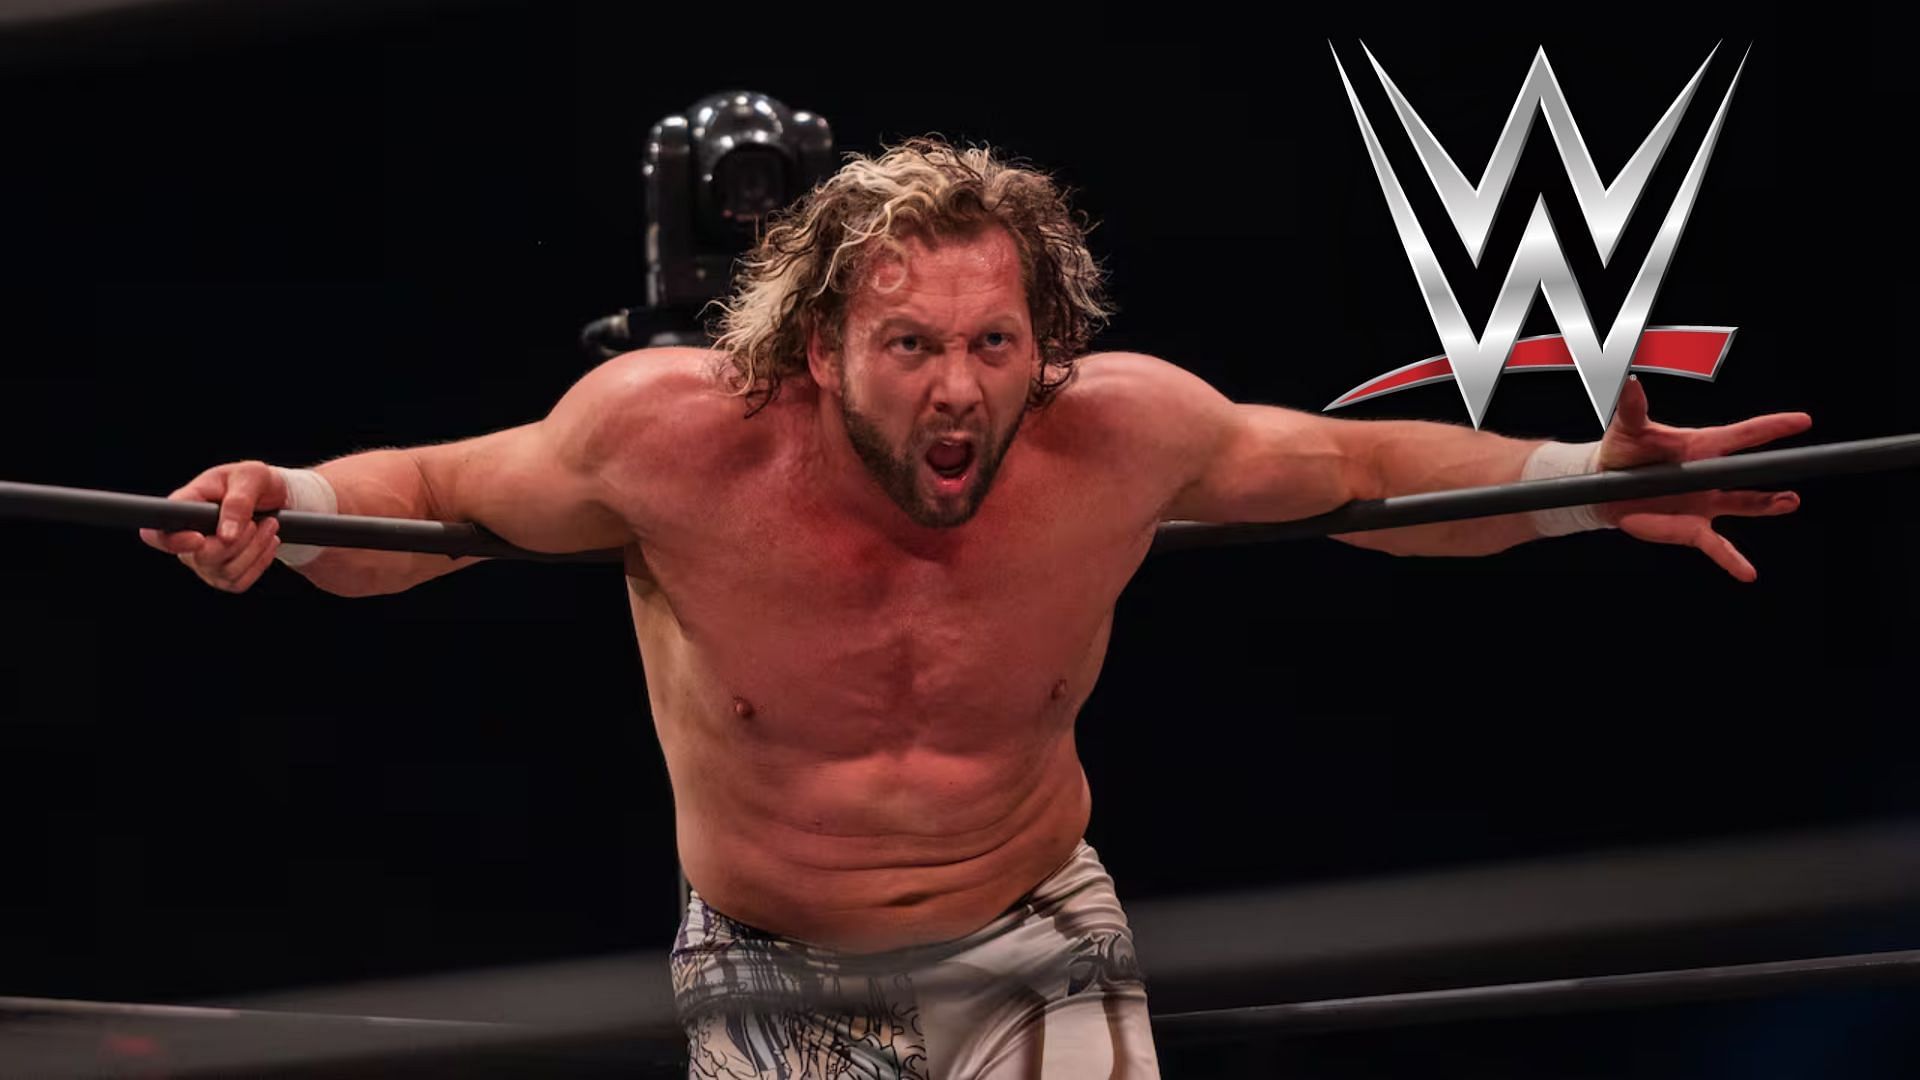 Kenny Omega was once a part of WWE